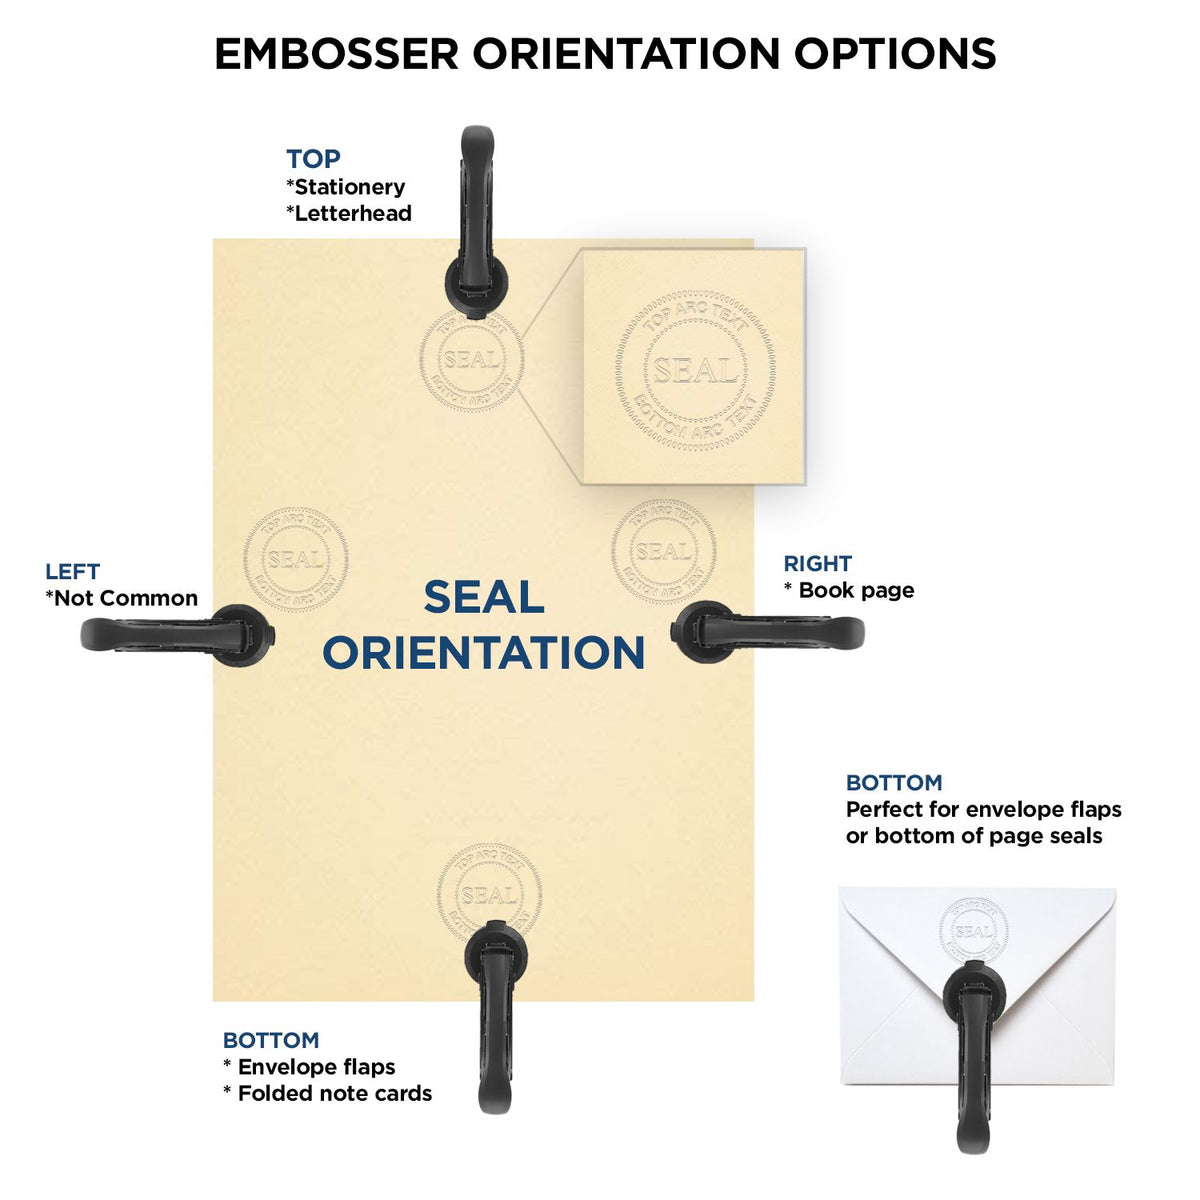 An infographic for the Hybrid Oklahoma Land Surveyor Seal showing embosser orientation, this is showing examples of a top, bottom, right and left insert.